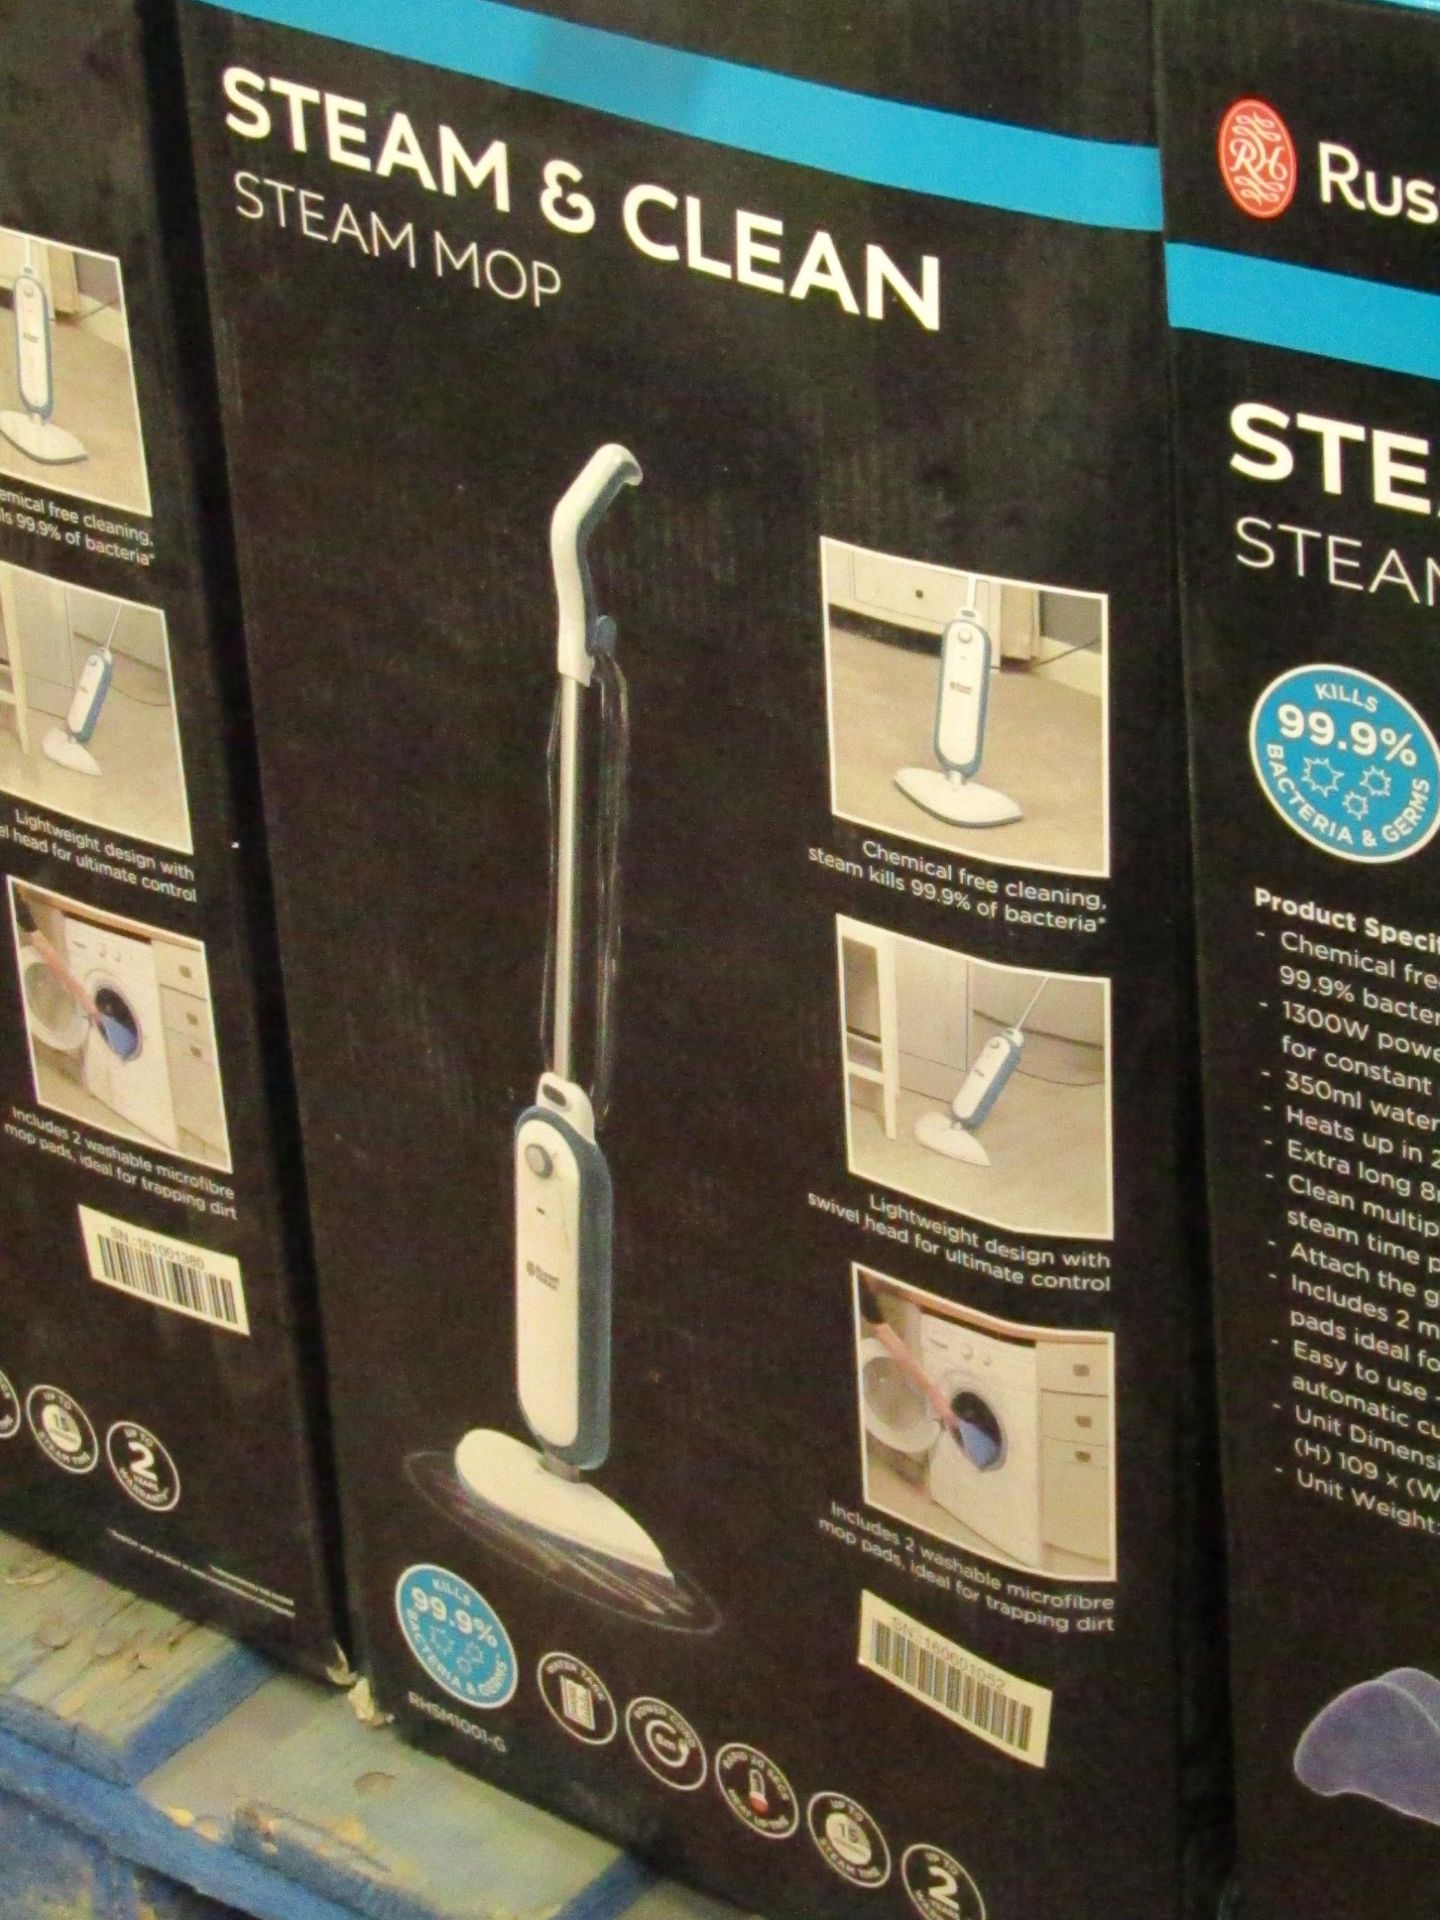 Russell Hobbs steam and clean steam mop, we have spot checked and few of these and all appear to